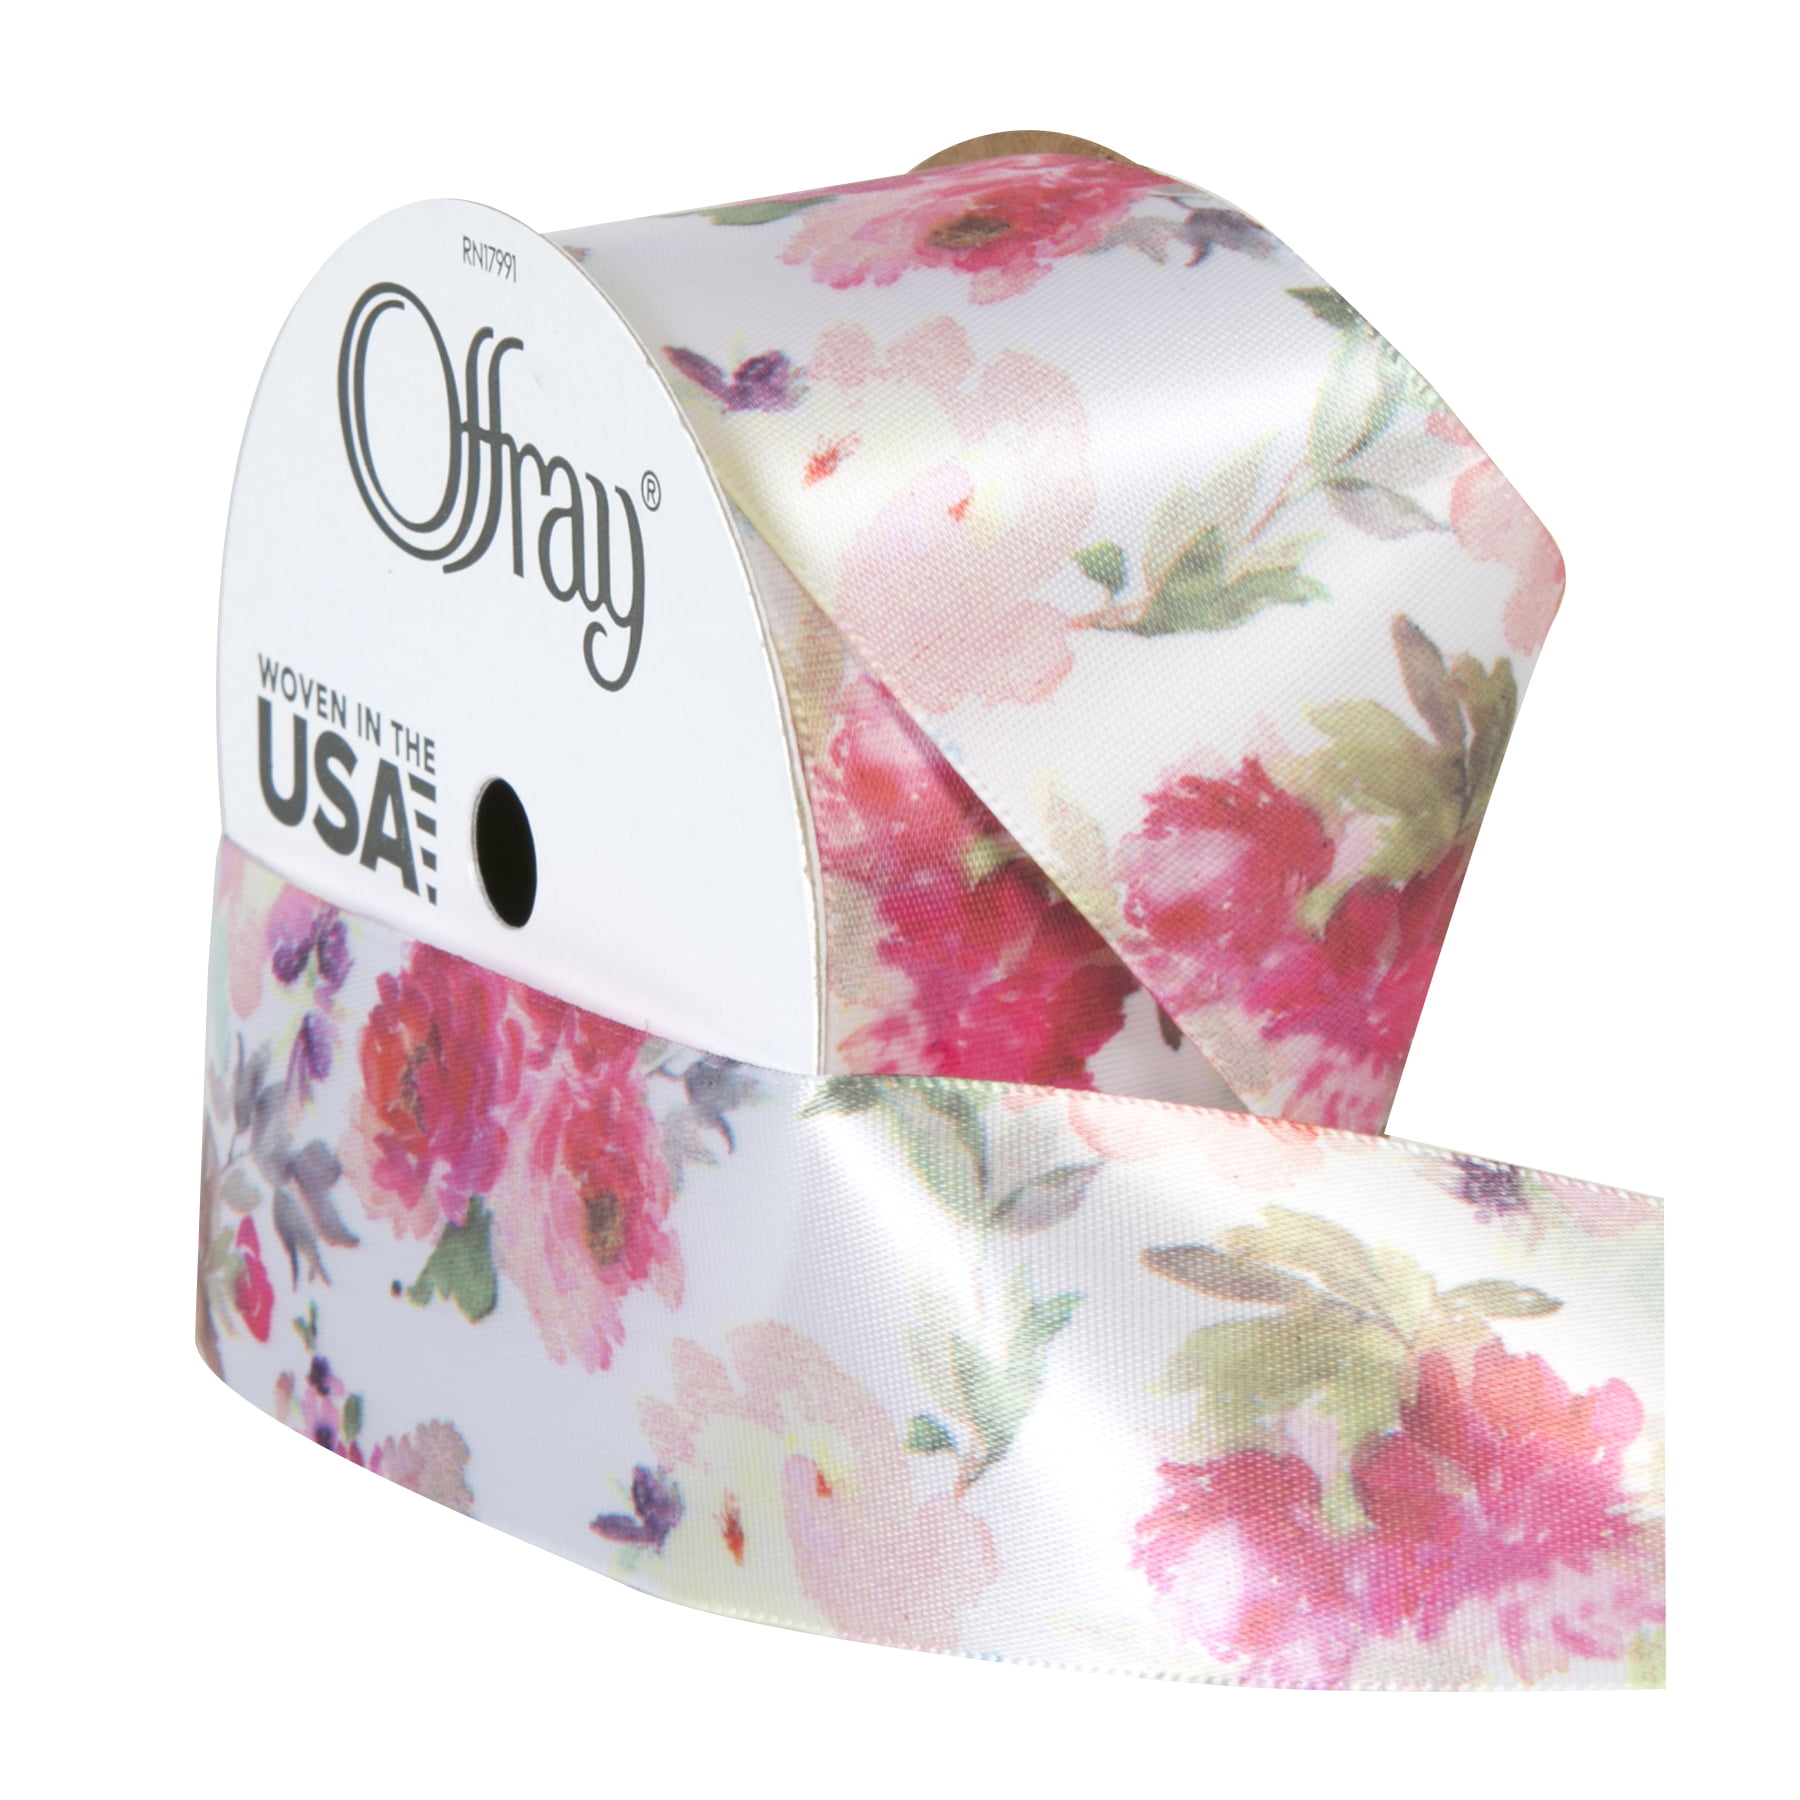 Offray Ribbon, White 1 1/2 inch Cutout Satin Ribbon for Sewing, Crafts, and  Wedding, 9 feet, 1 Each - DroneUp Delivery